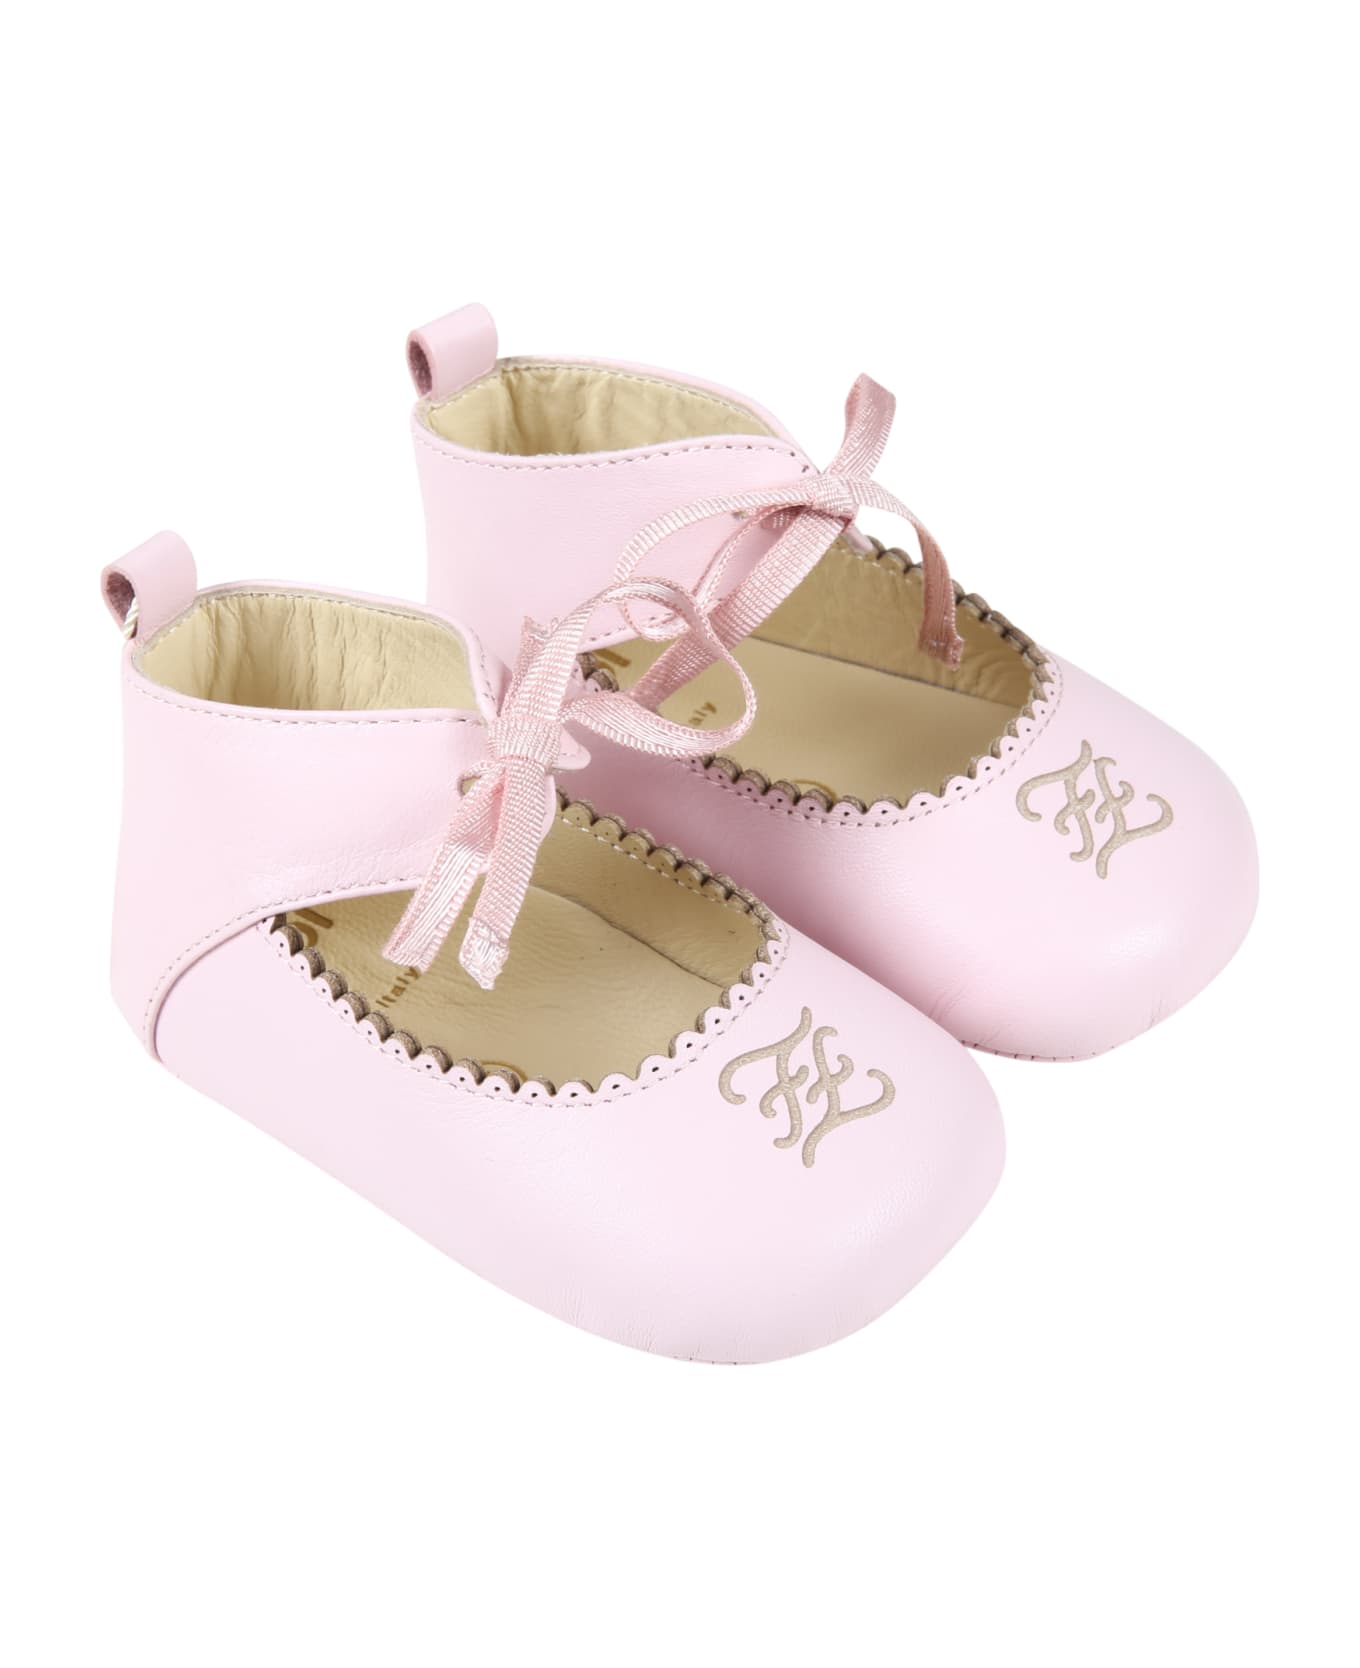 Fendi Pink Ballet Flats For Baby Girl With Karligraphy Ff - Pink